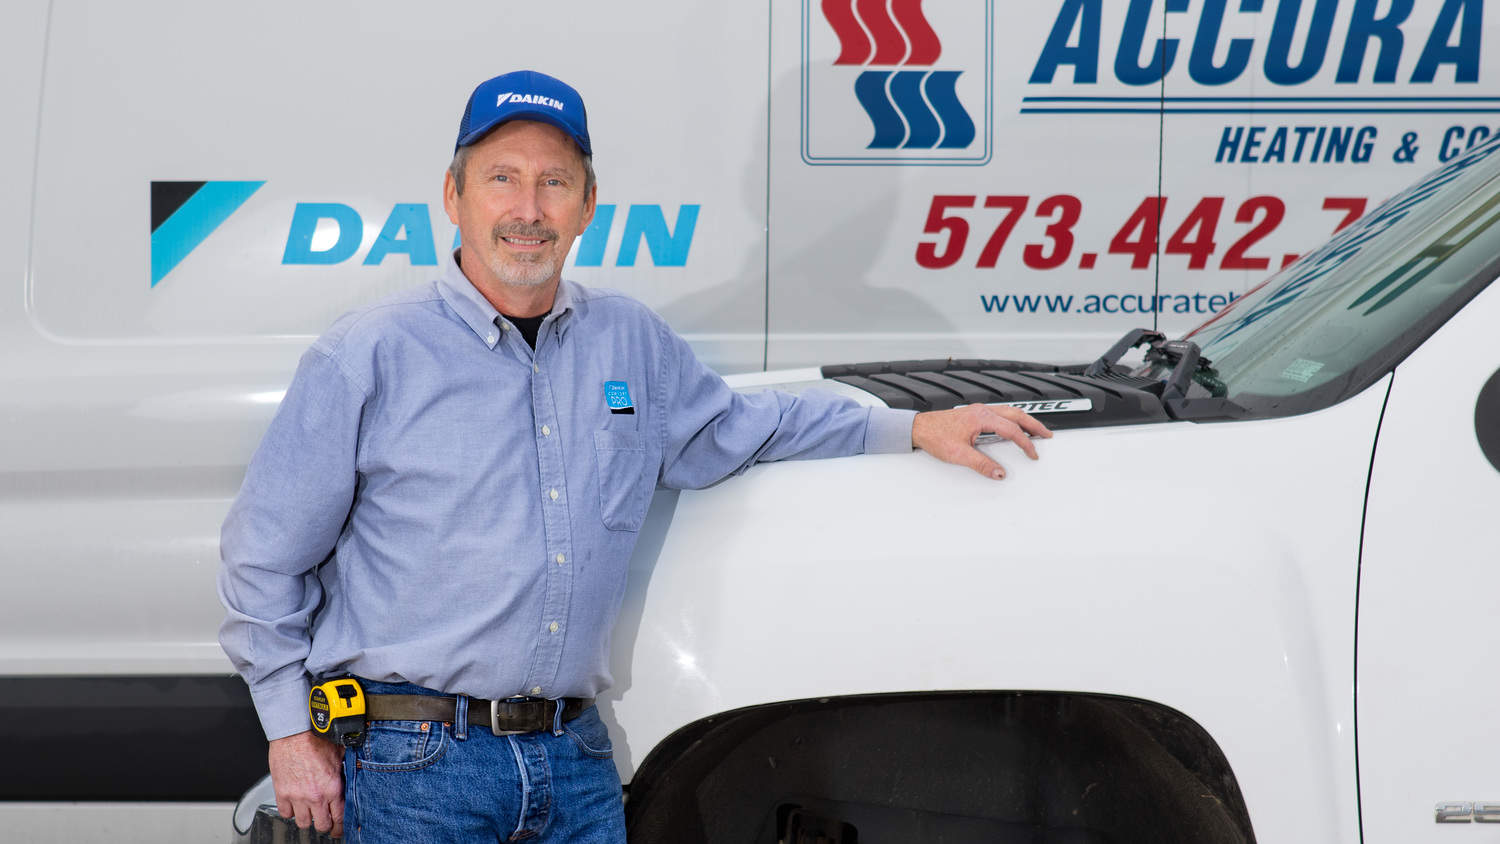 Accurate Heating & Cooling was founded by Clarence Woodard with the mission of providing affordable, yet quality heating and cooling services in mid-Missouri.